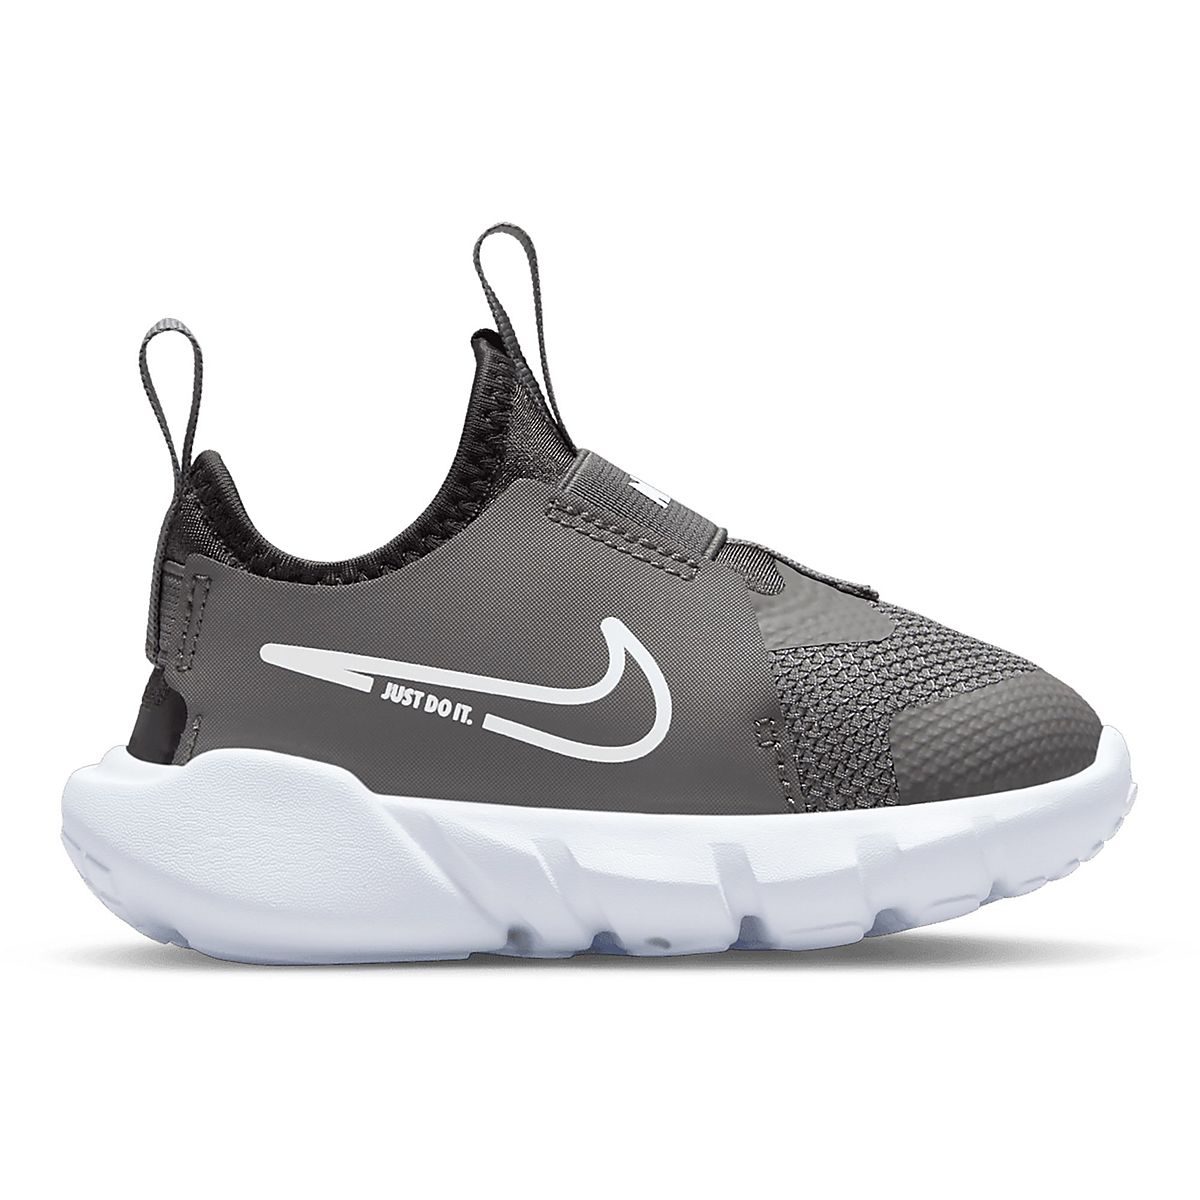 Nike Toddlers' Flex Runner 2 Shoes | Free Shipping at Academy